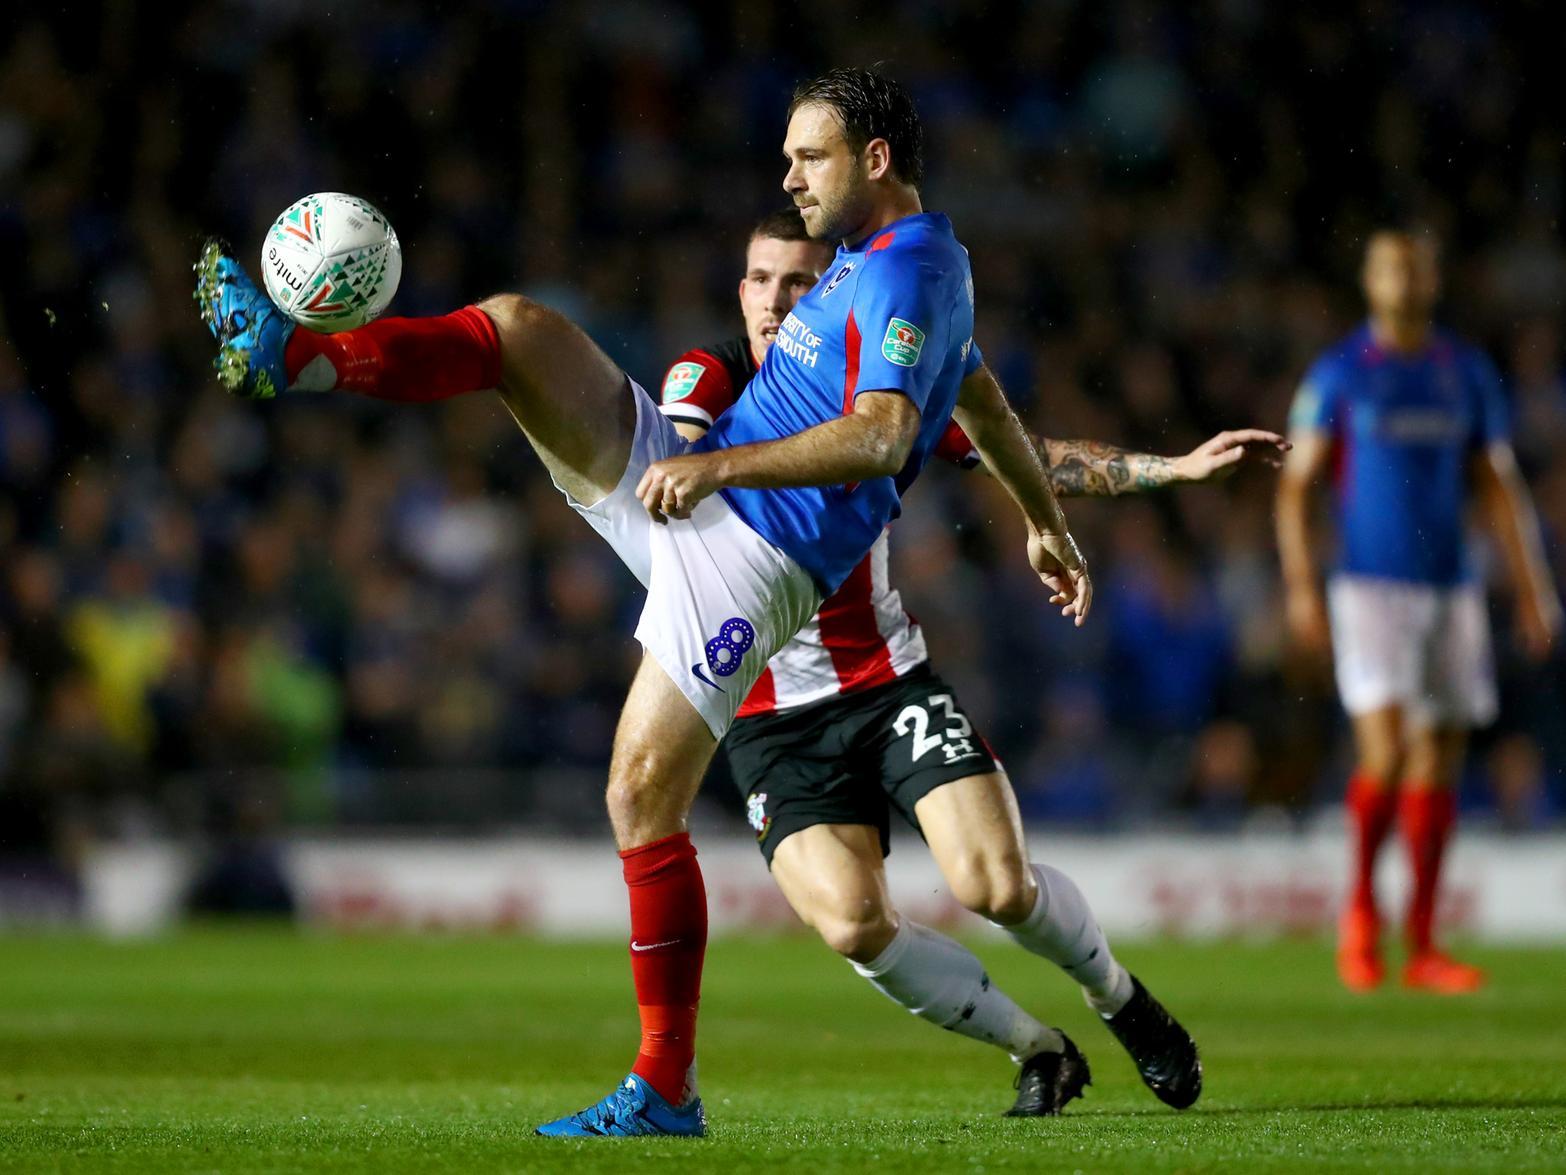 Plymouth have been linked with a move for Portsmouth striker Brett Pitman. (The Sun)